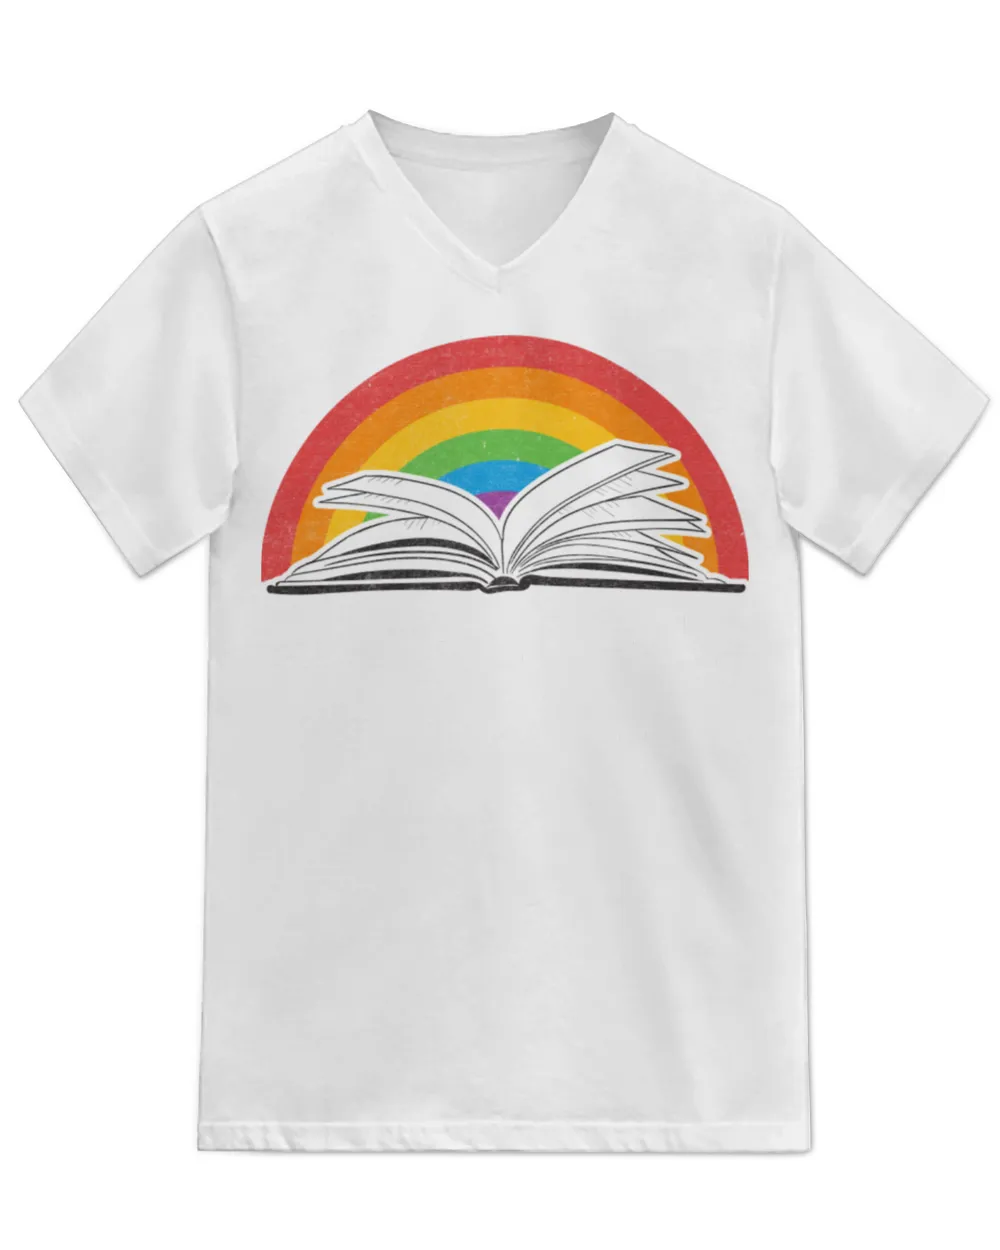 Take a Look, it's In a Book Reading Rainbow